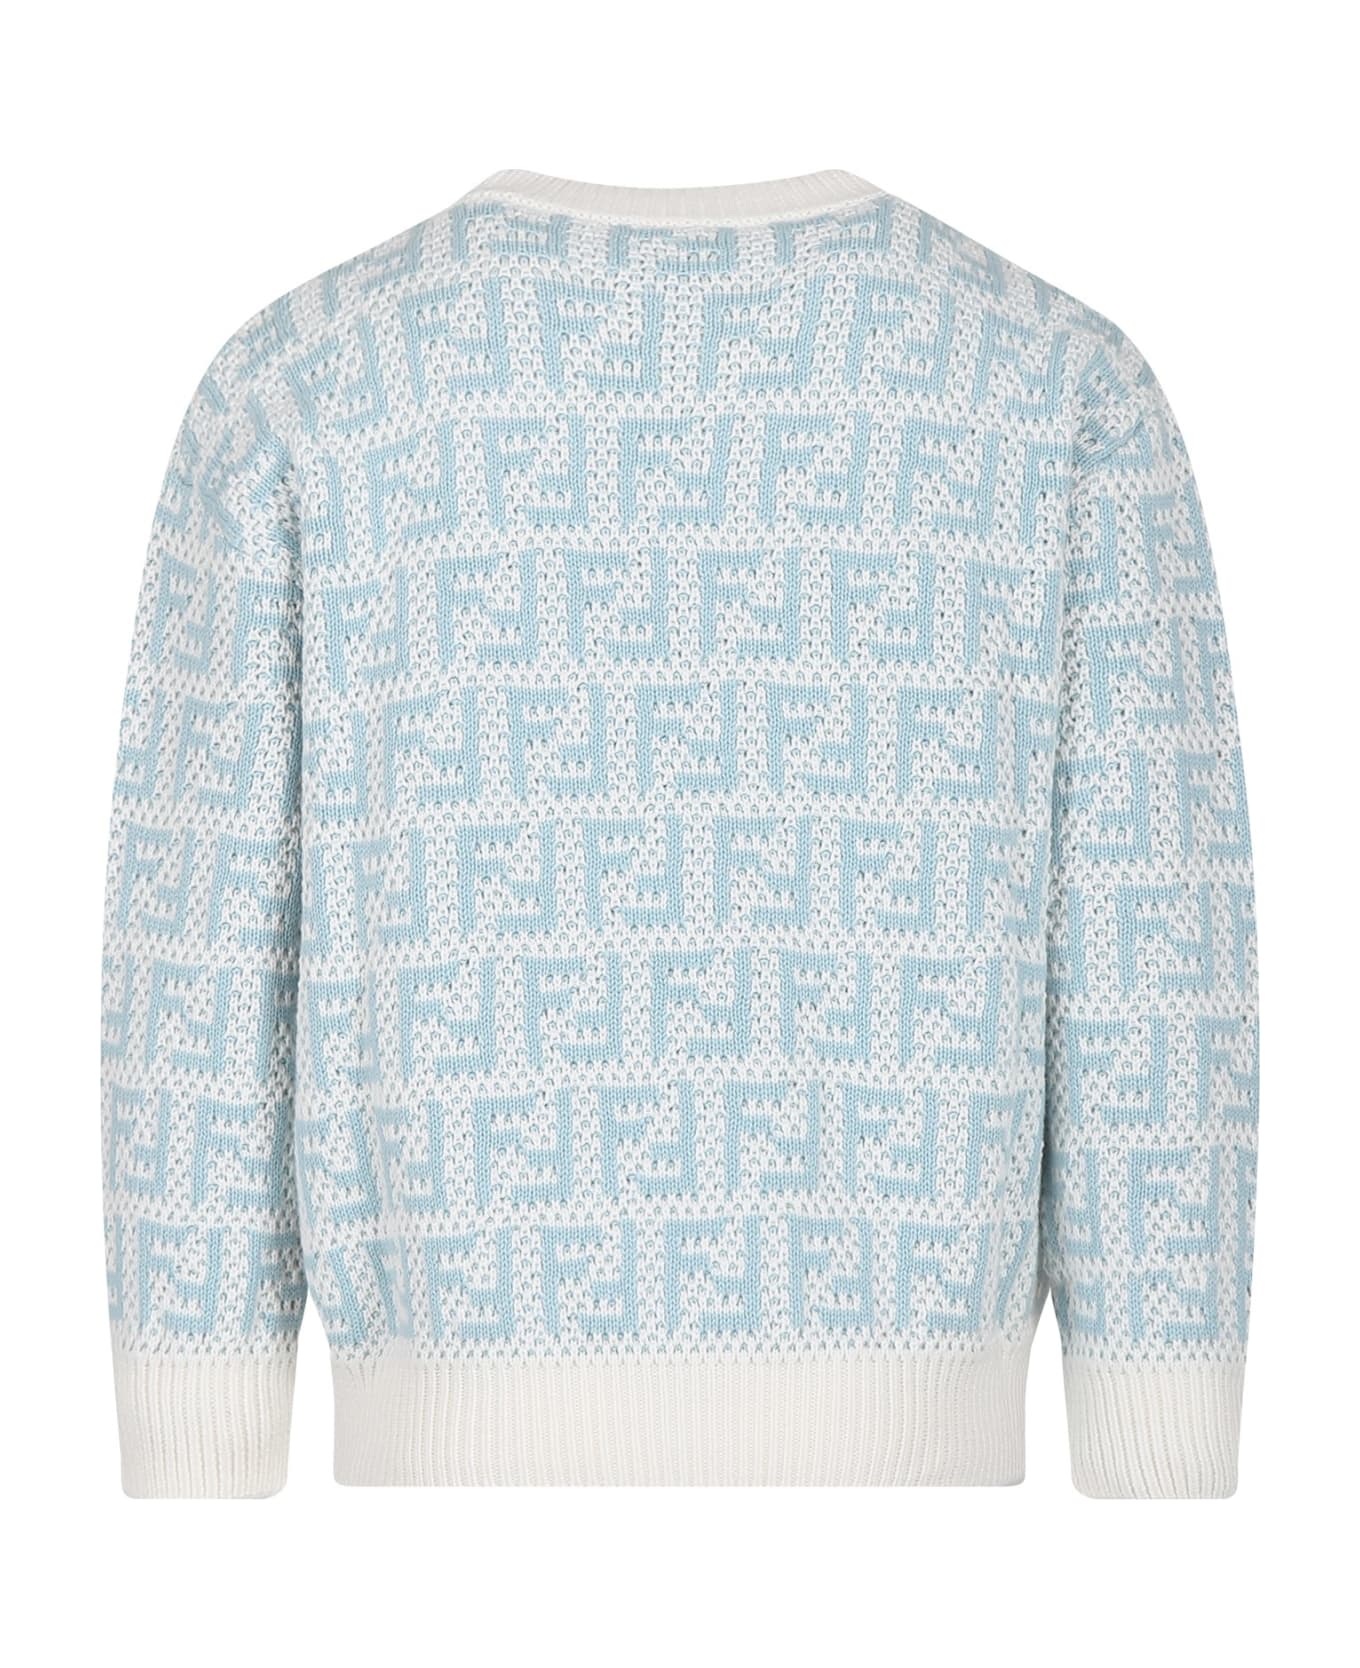 Fendi Light Blue Sweater For Kids With Double F - Light Blue